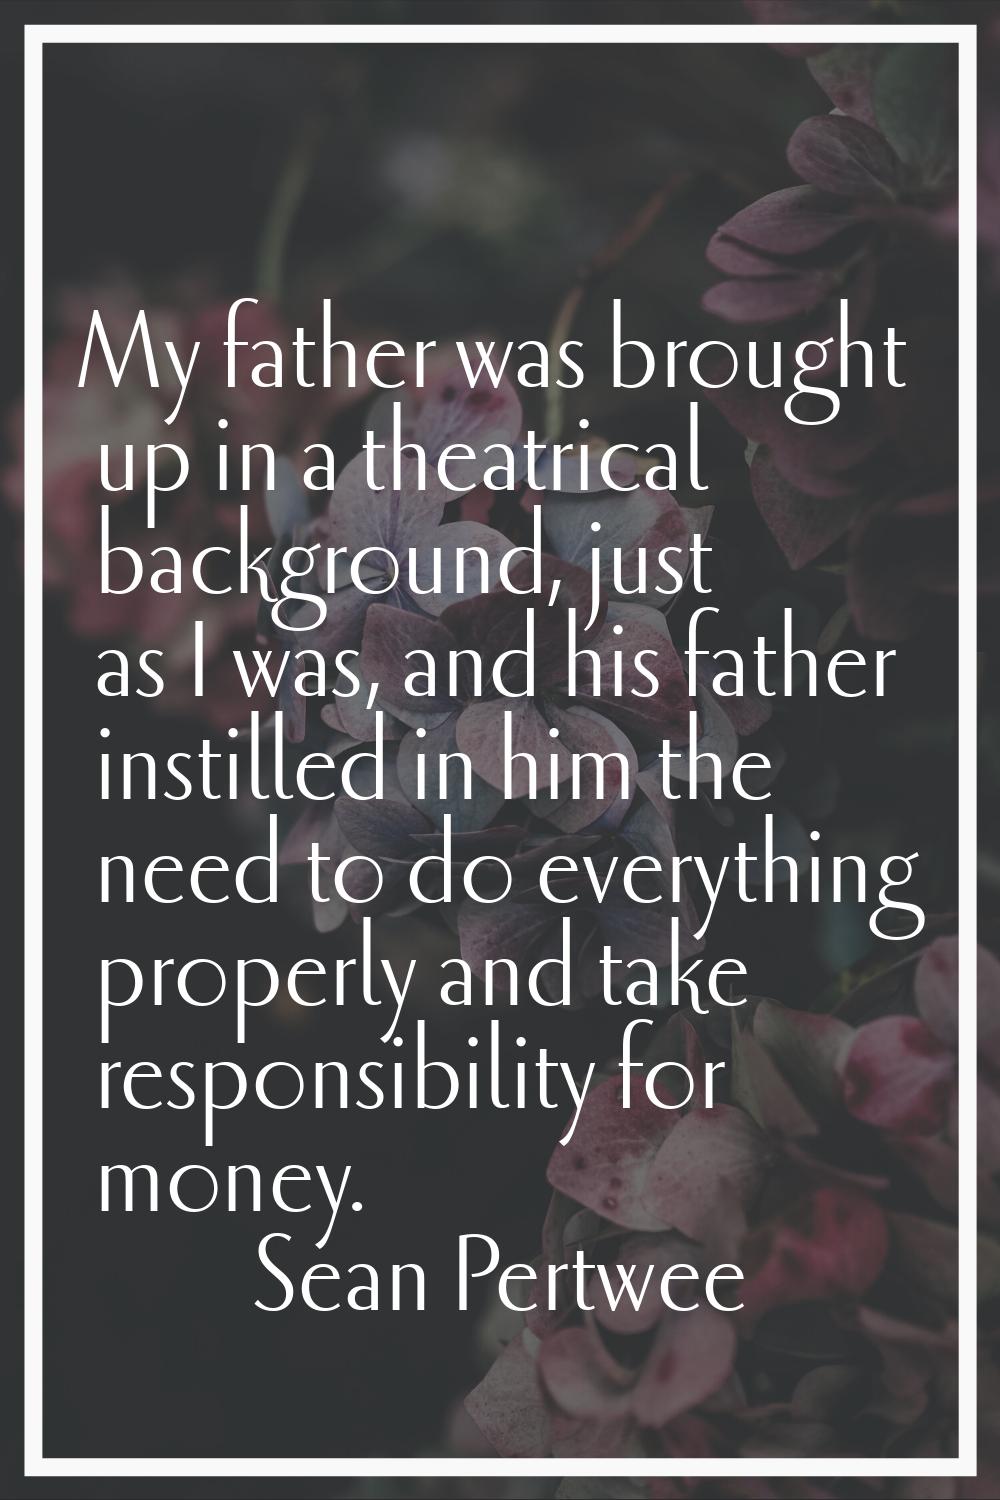 My father was brought up in a theatrical background, just as I was, and his father instilled in him